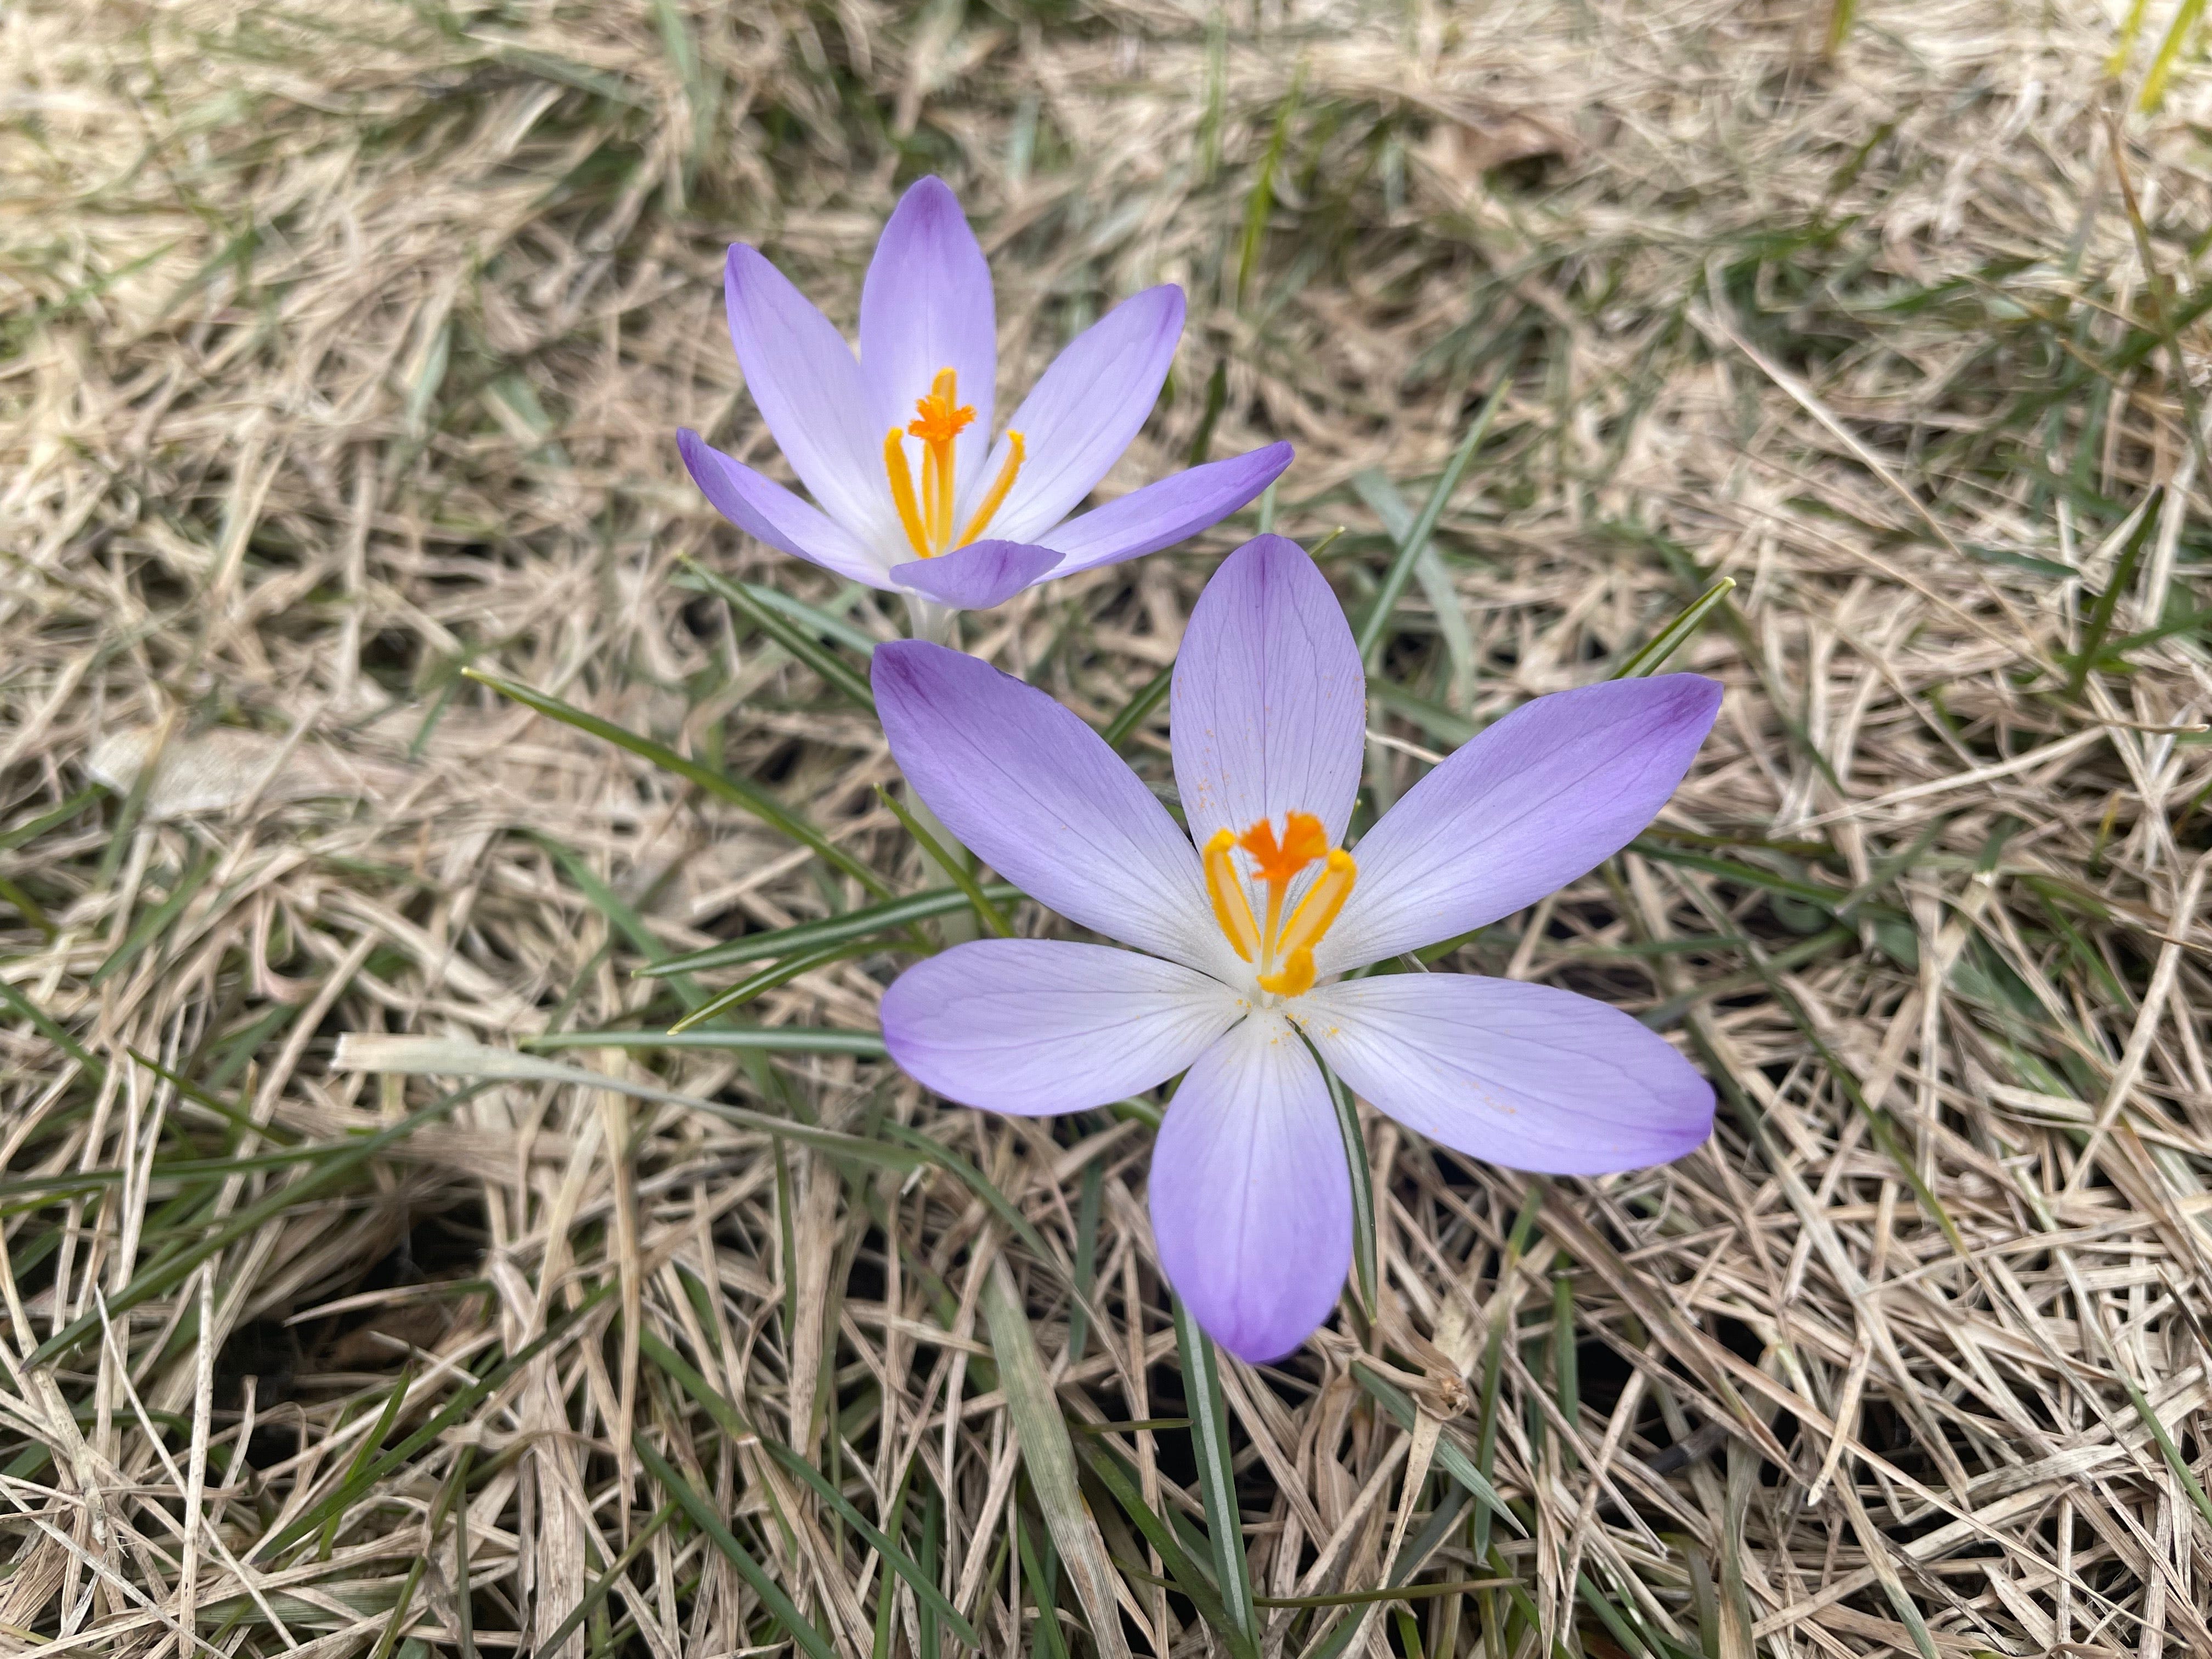 two small pale purple flowers with yellow centerse poking up from a bed of dried grass